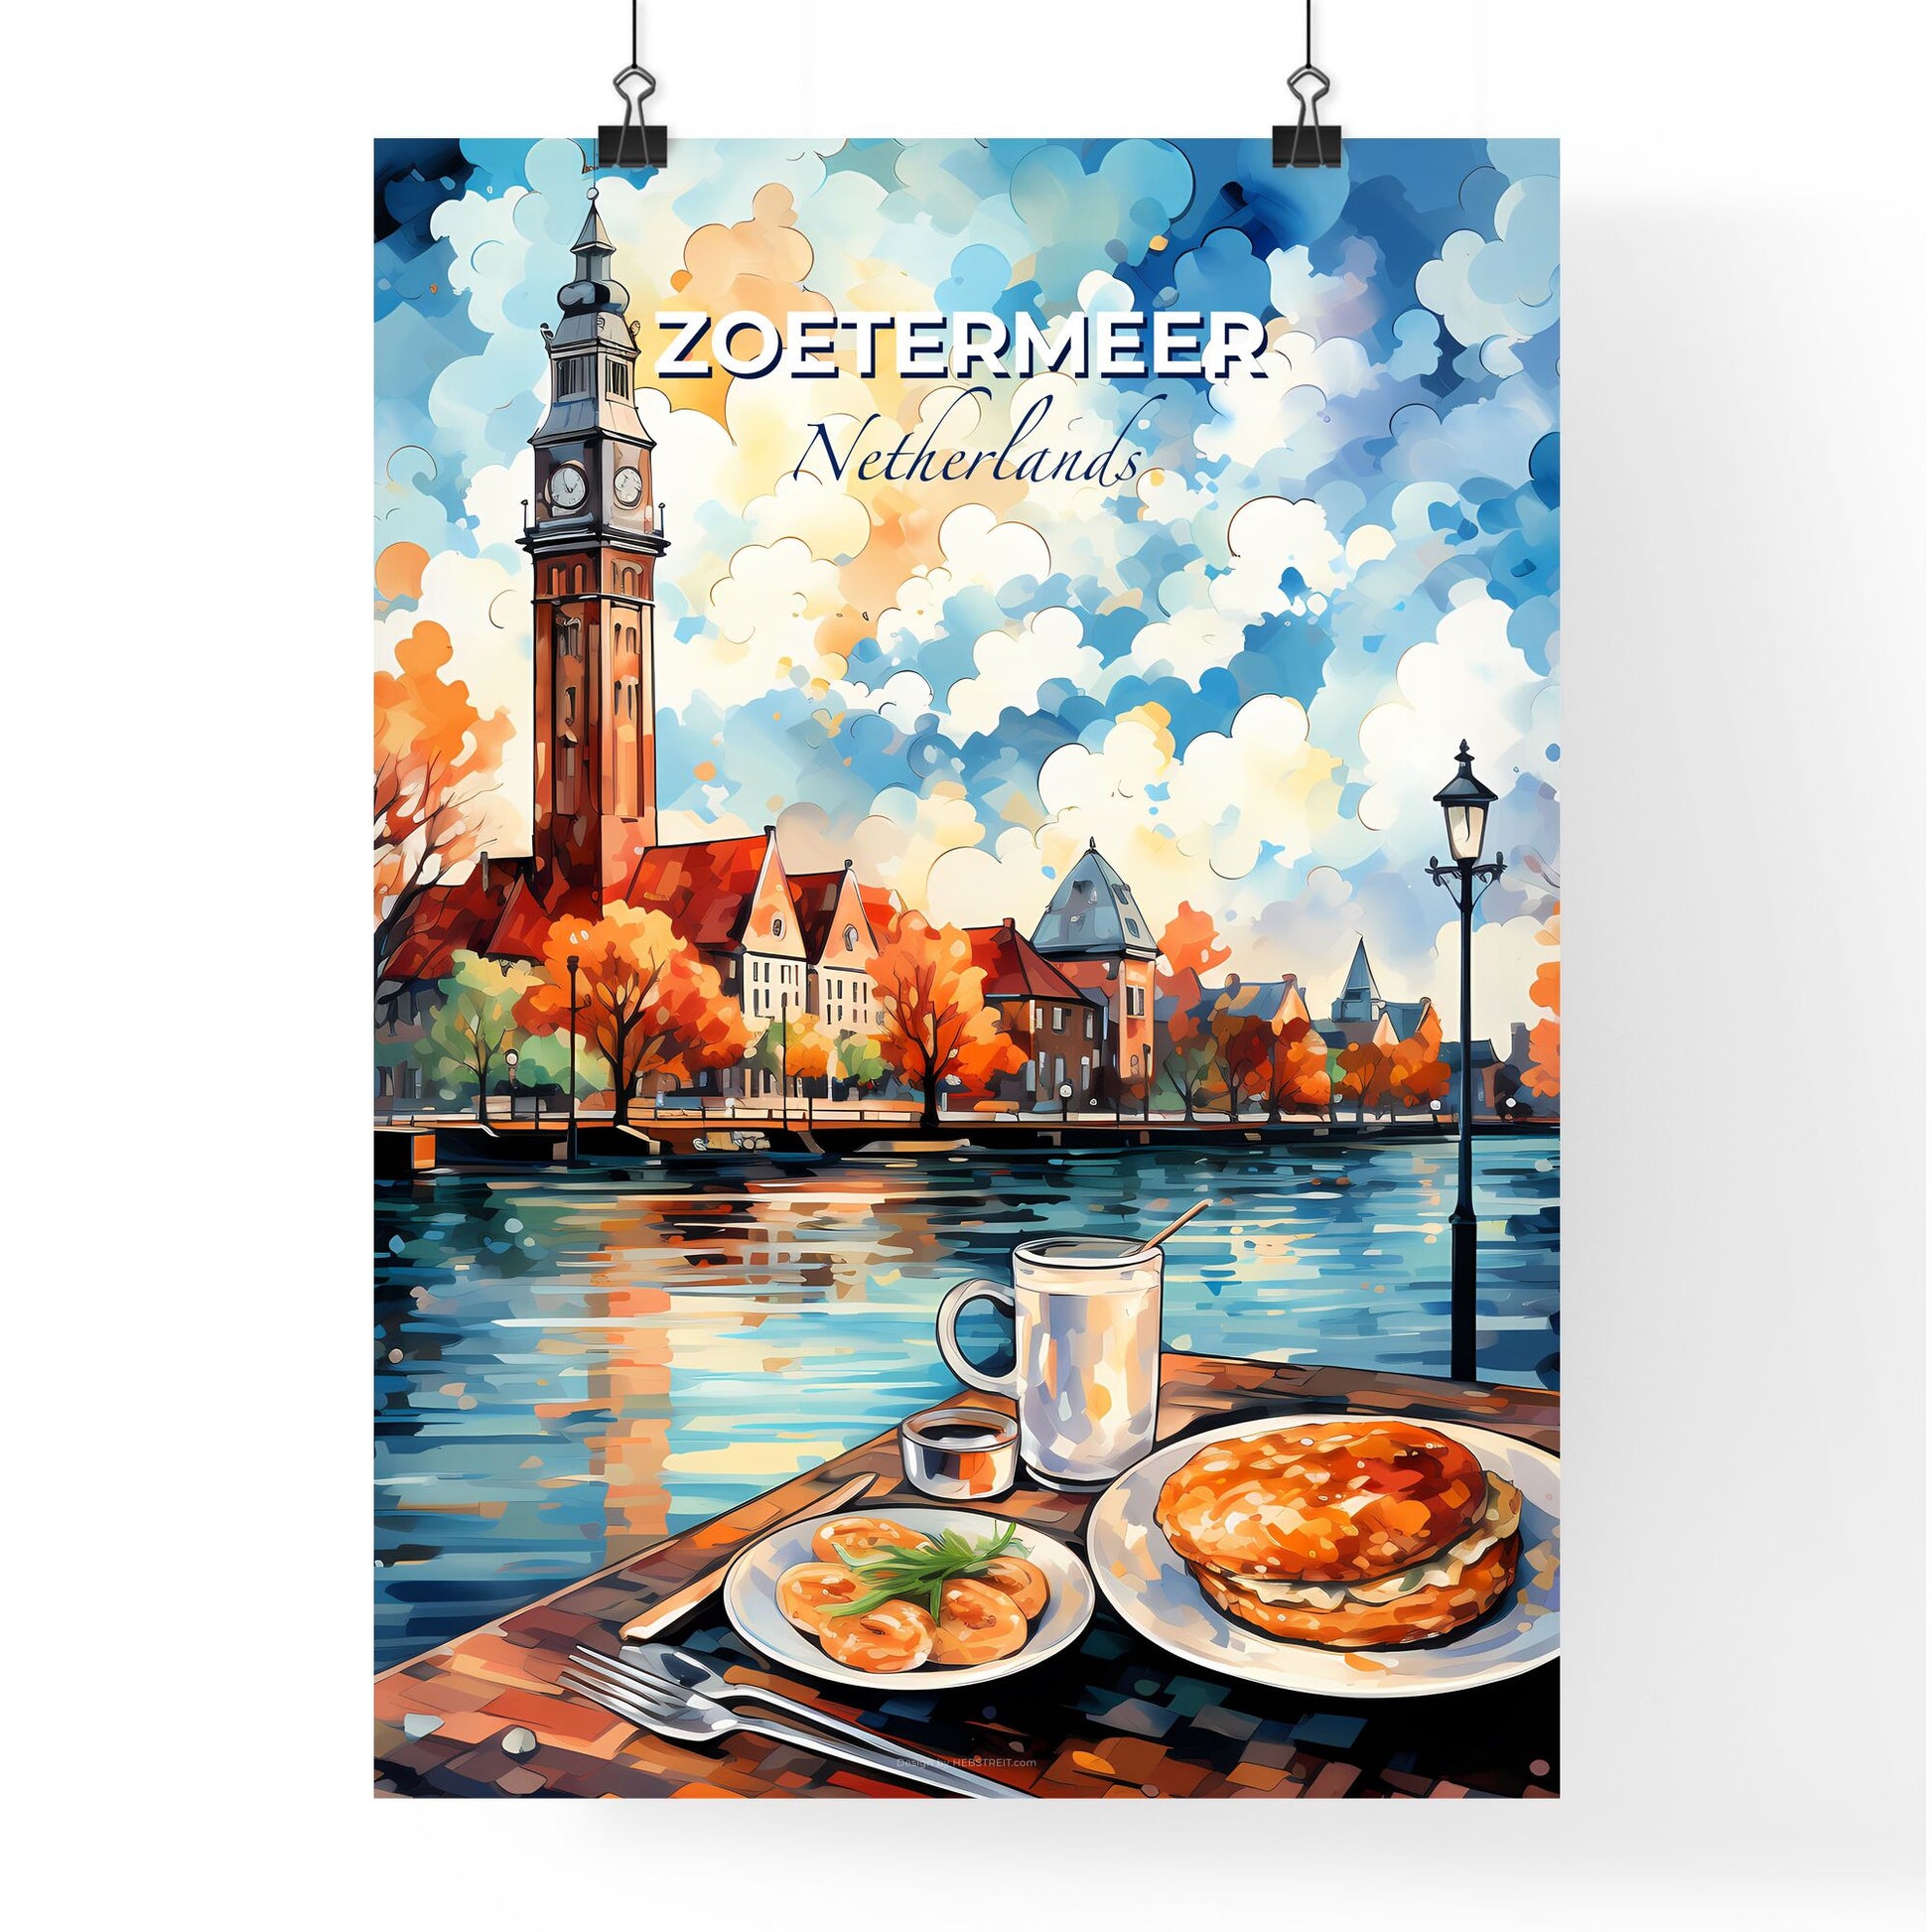 Zoetermeer, Netherlands, A Poster of a painting of a city with a clock tower and a lake Default Title